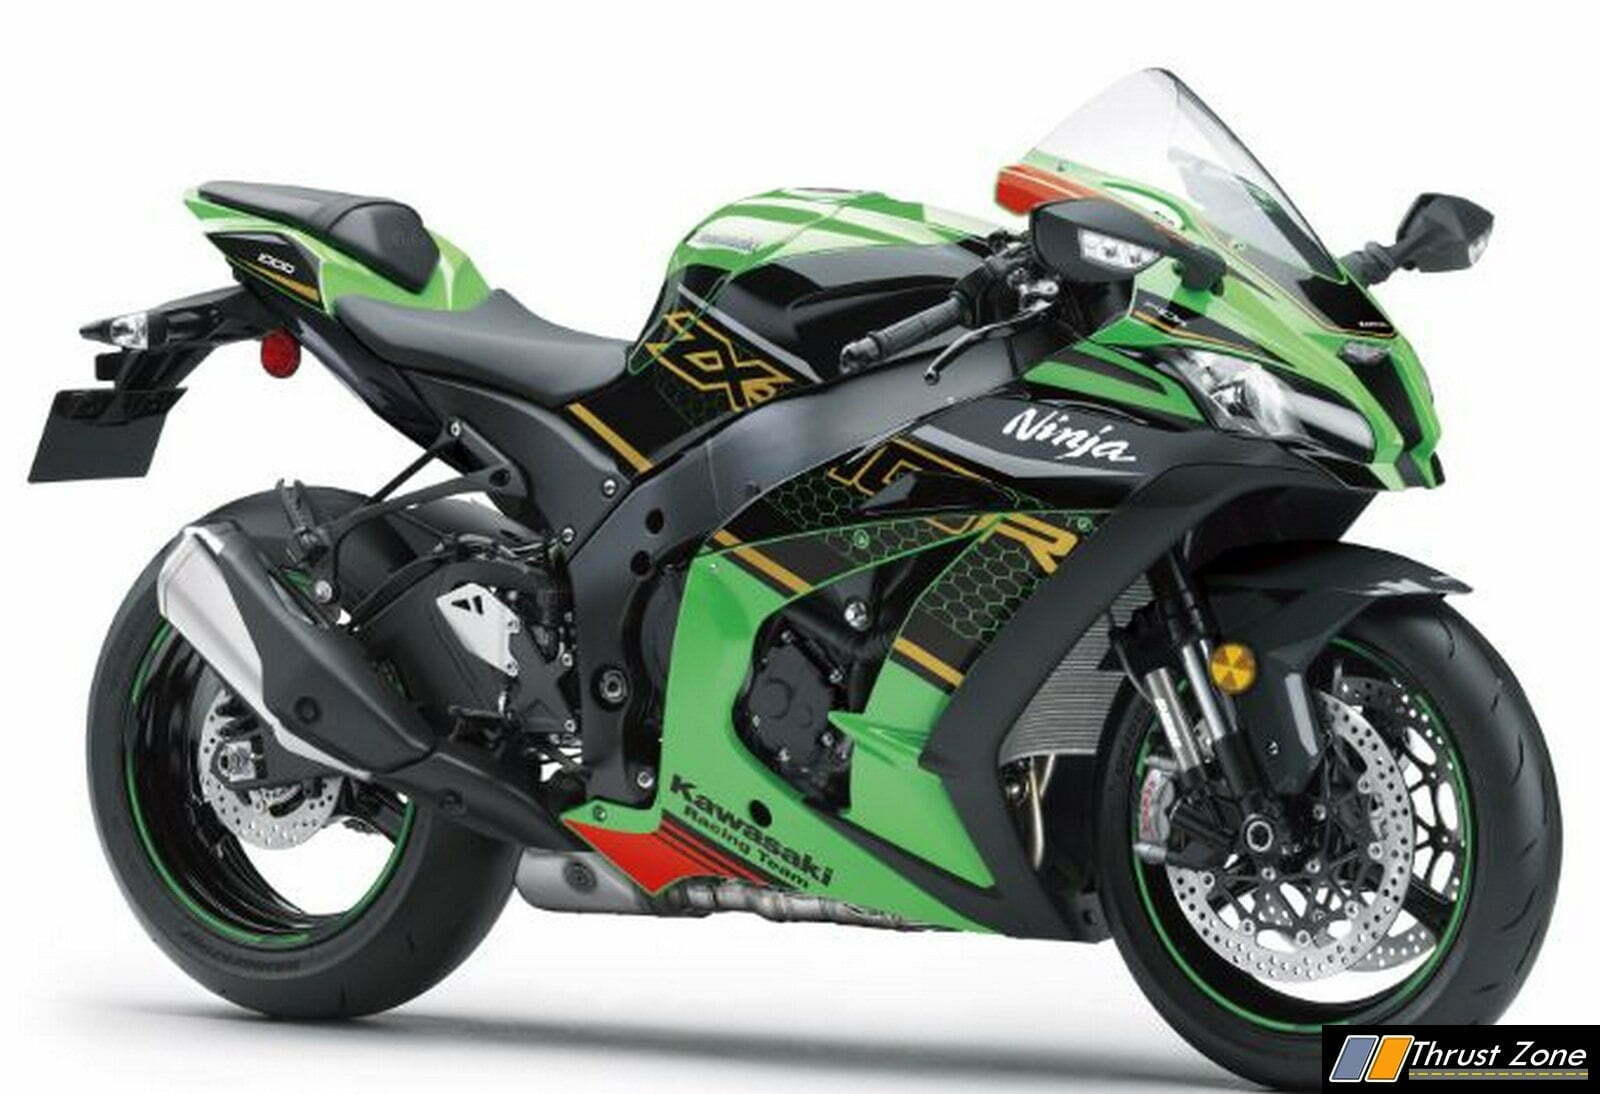 2020 Ninja ZX-10R India Launch Done - Cosmetic Changes Only